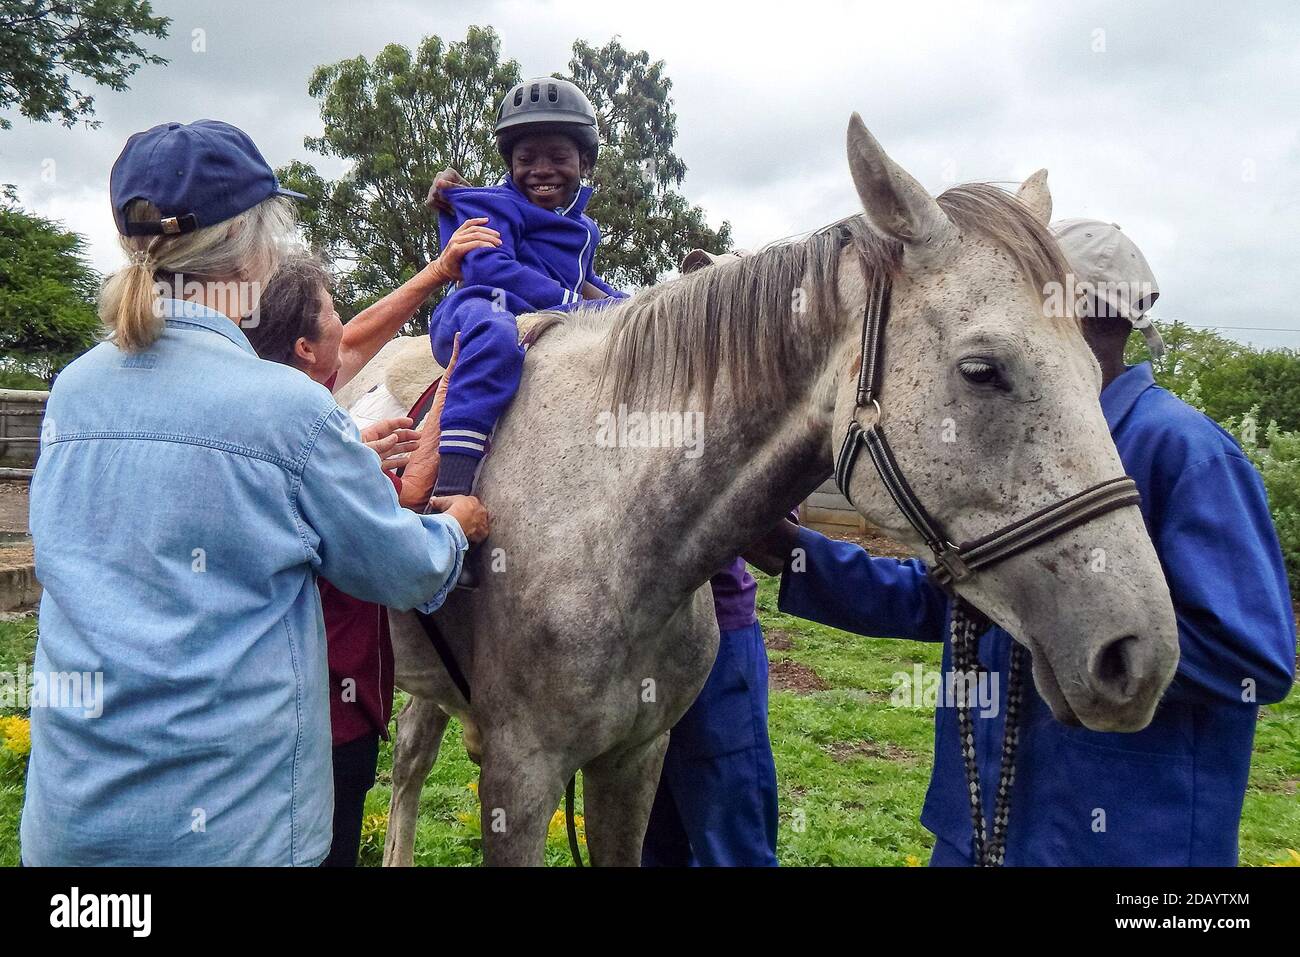 Emmanuel Choto, 8, a student at King George VI, a school for children who are disabled or show signs of autism, rides a horse at Gumtree Farm in Willsgrove, Zimbabwe. Stock Photo